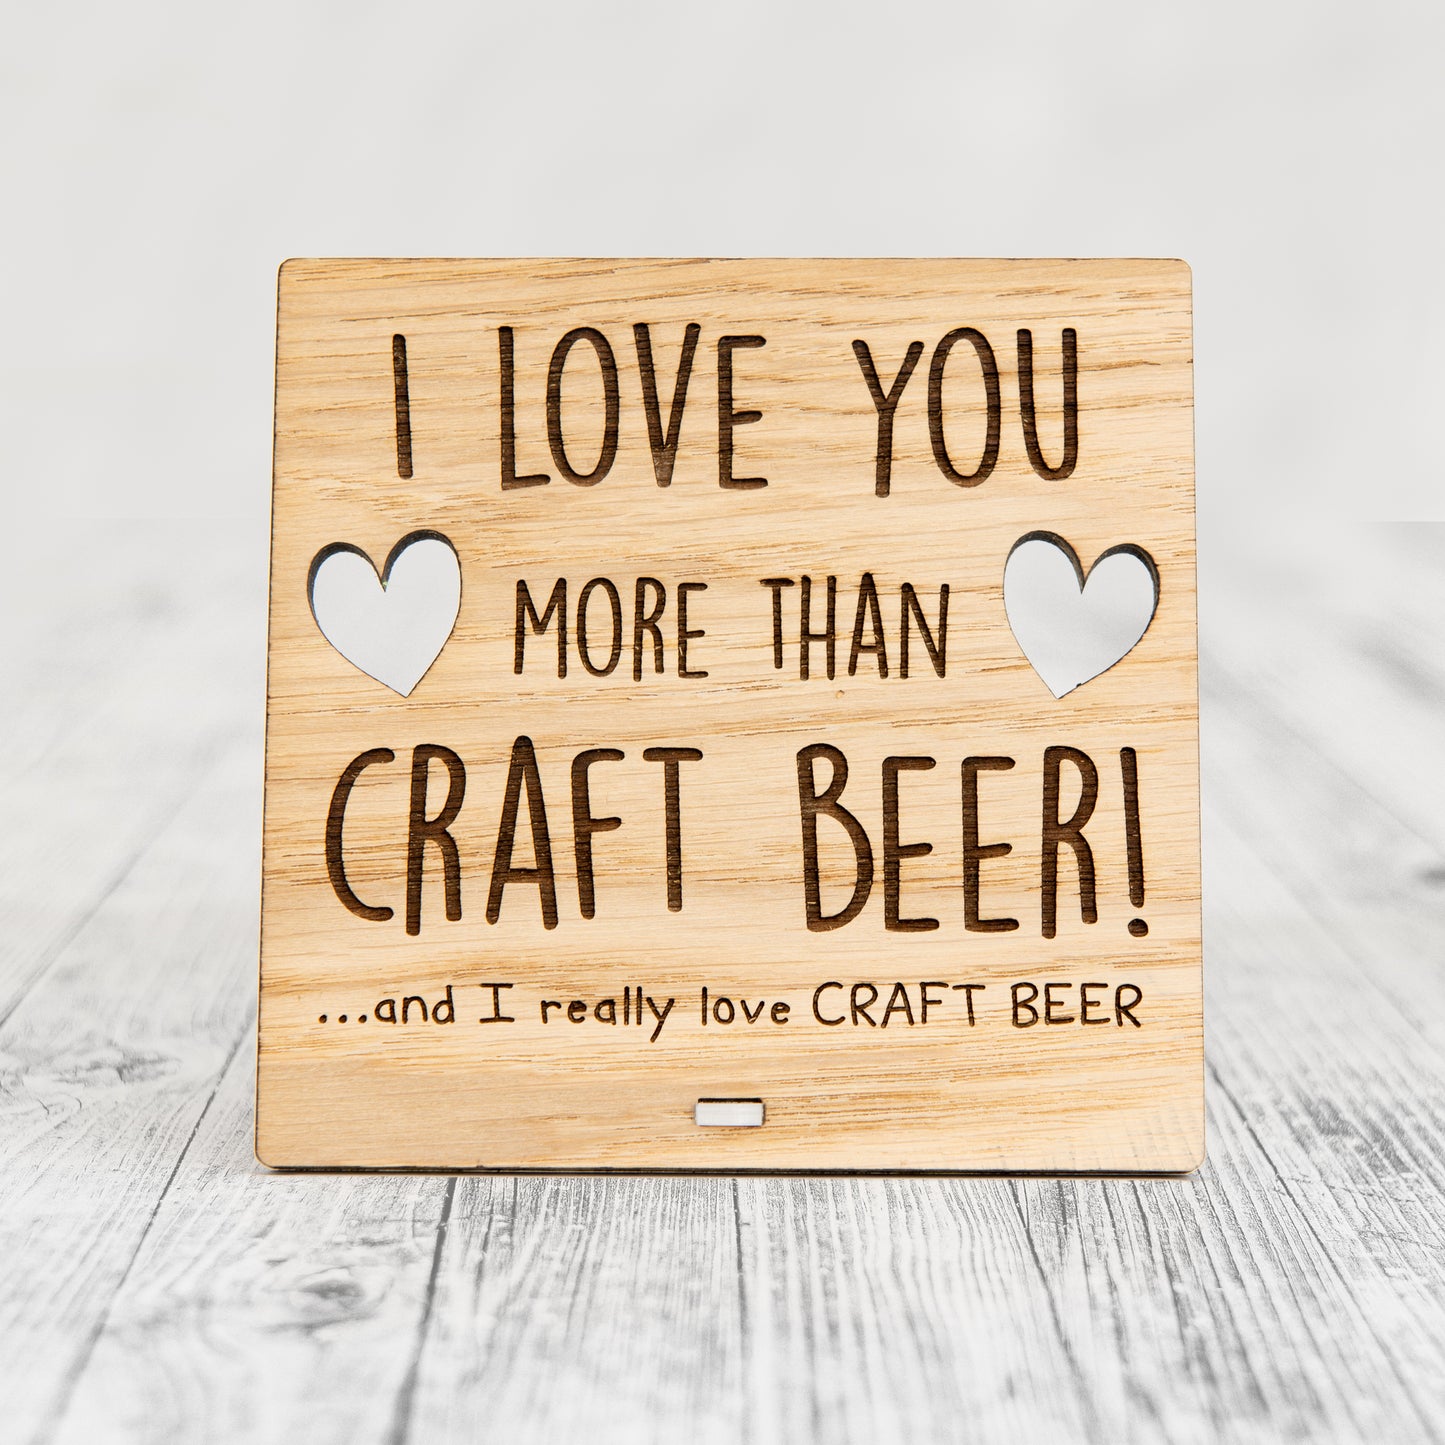 I Love You More Than CRAFT BEER - Wooden Valentine's Day Plaque